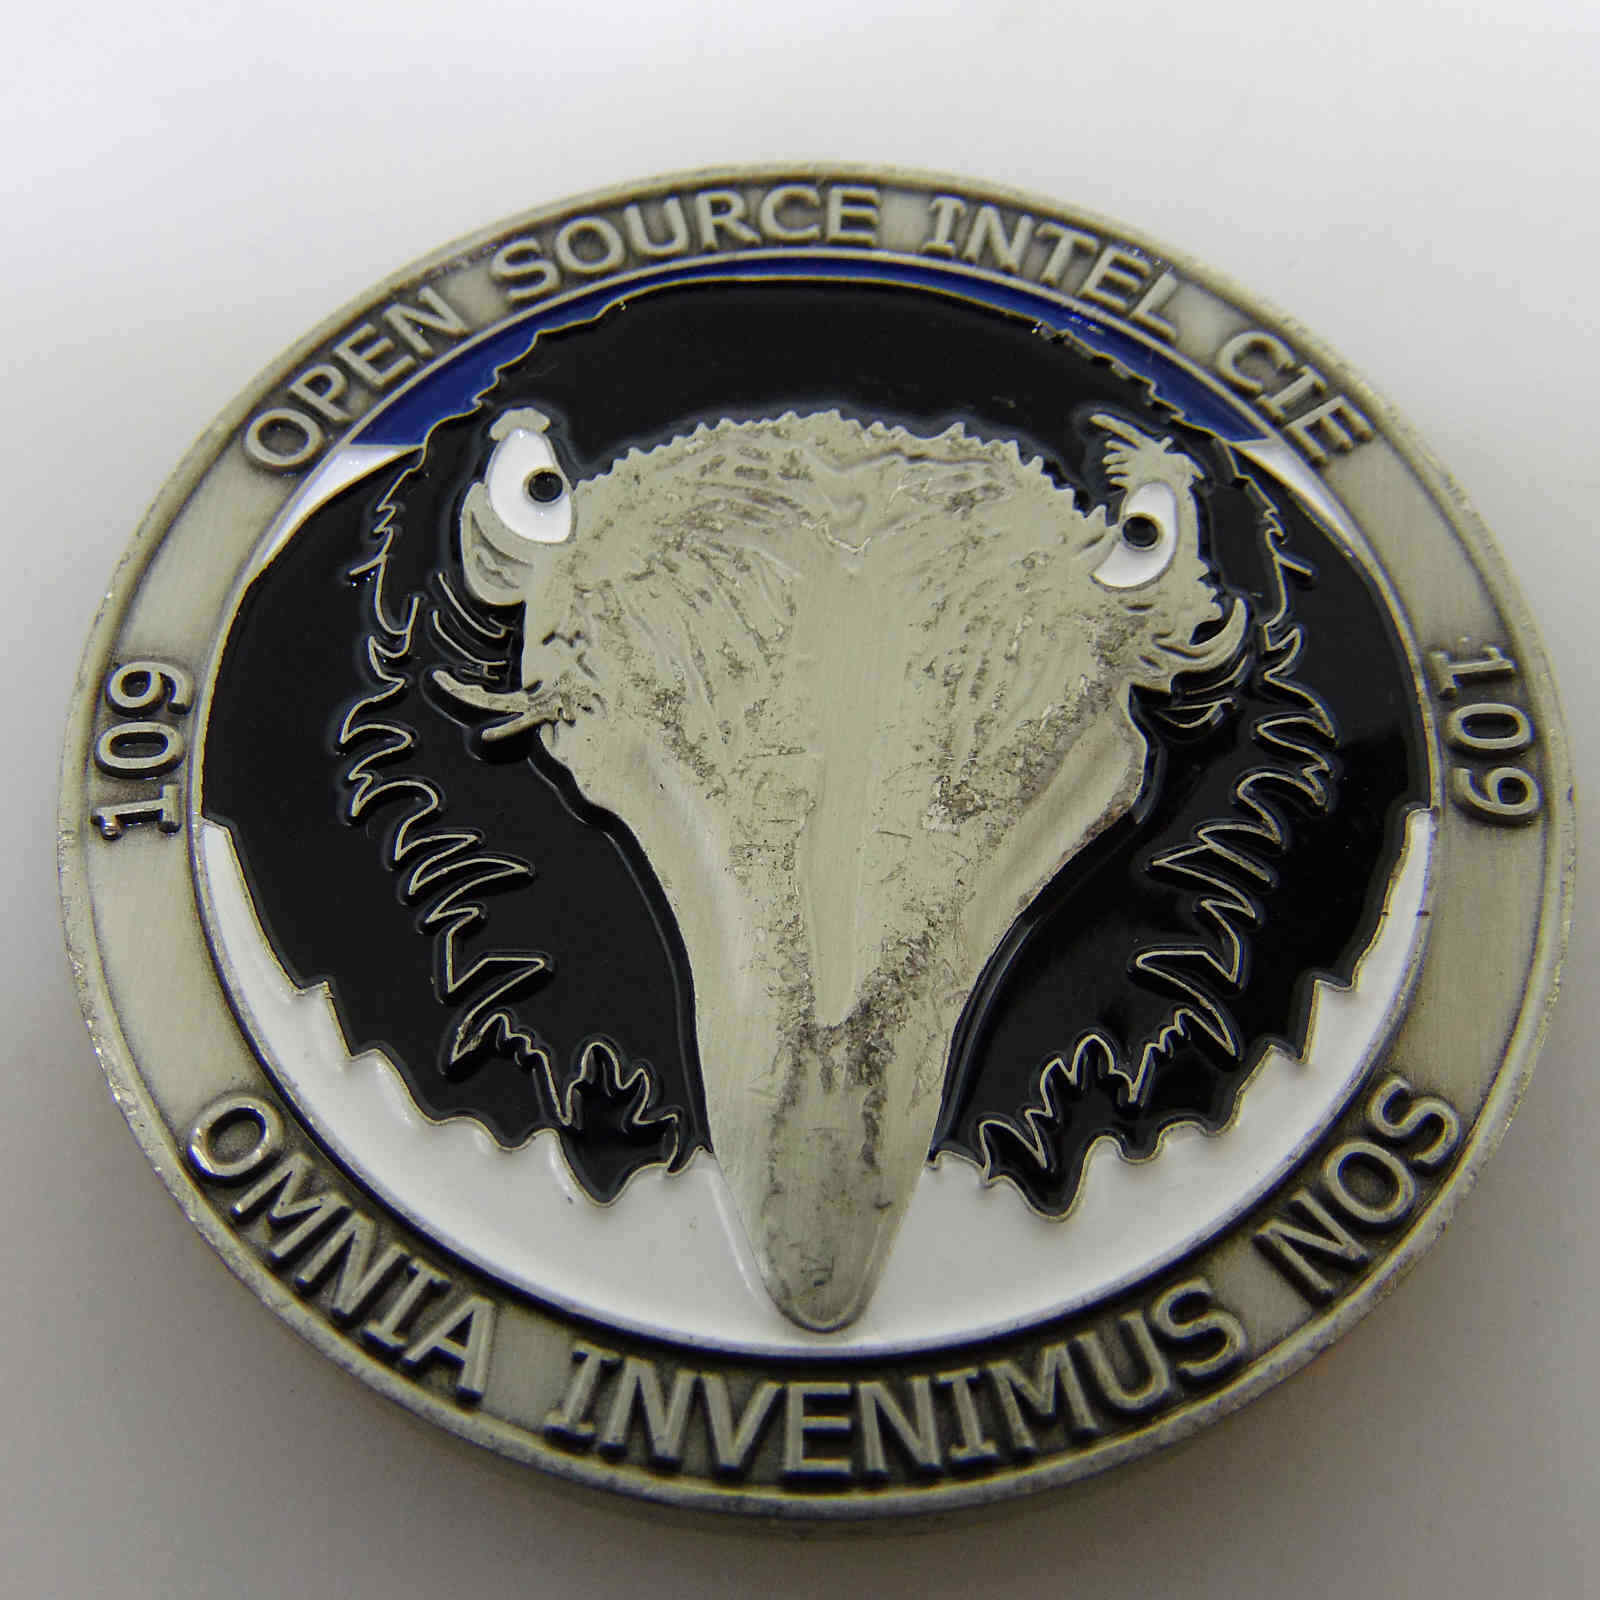 OMNIA INVENIMUS NOS CLAW OF THE MAGPIE CHALLENGE COIN